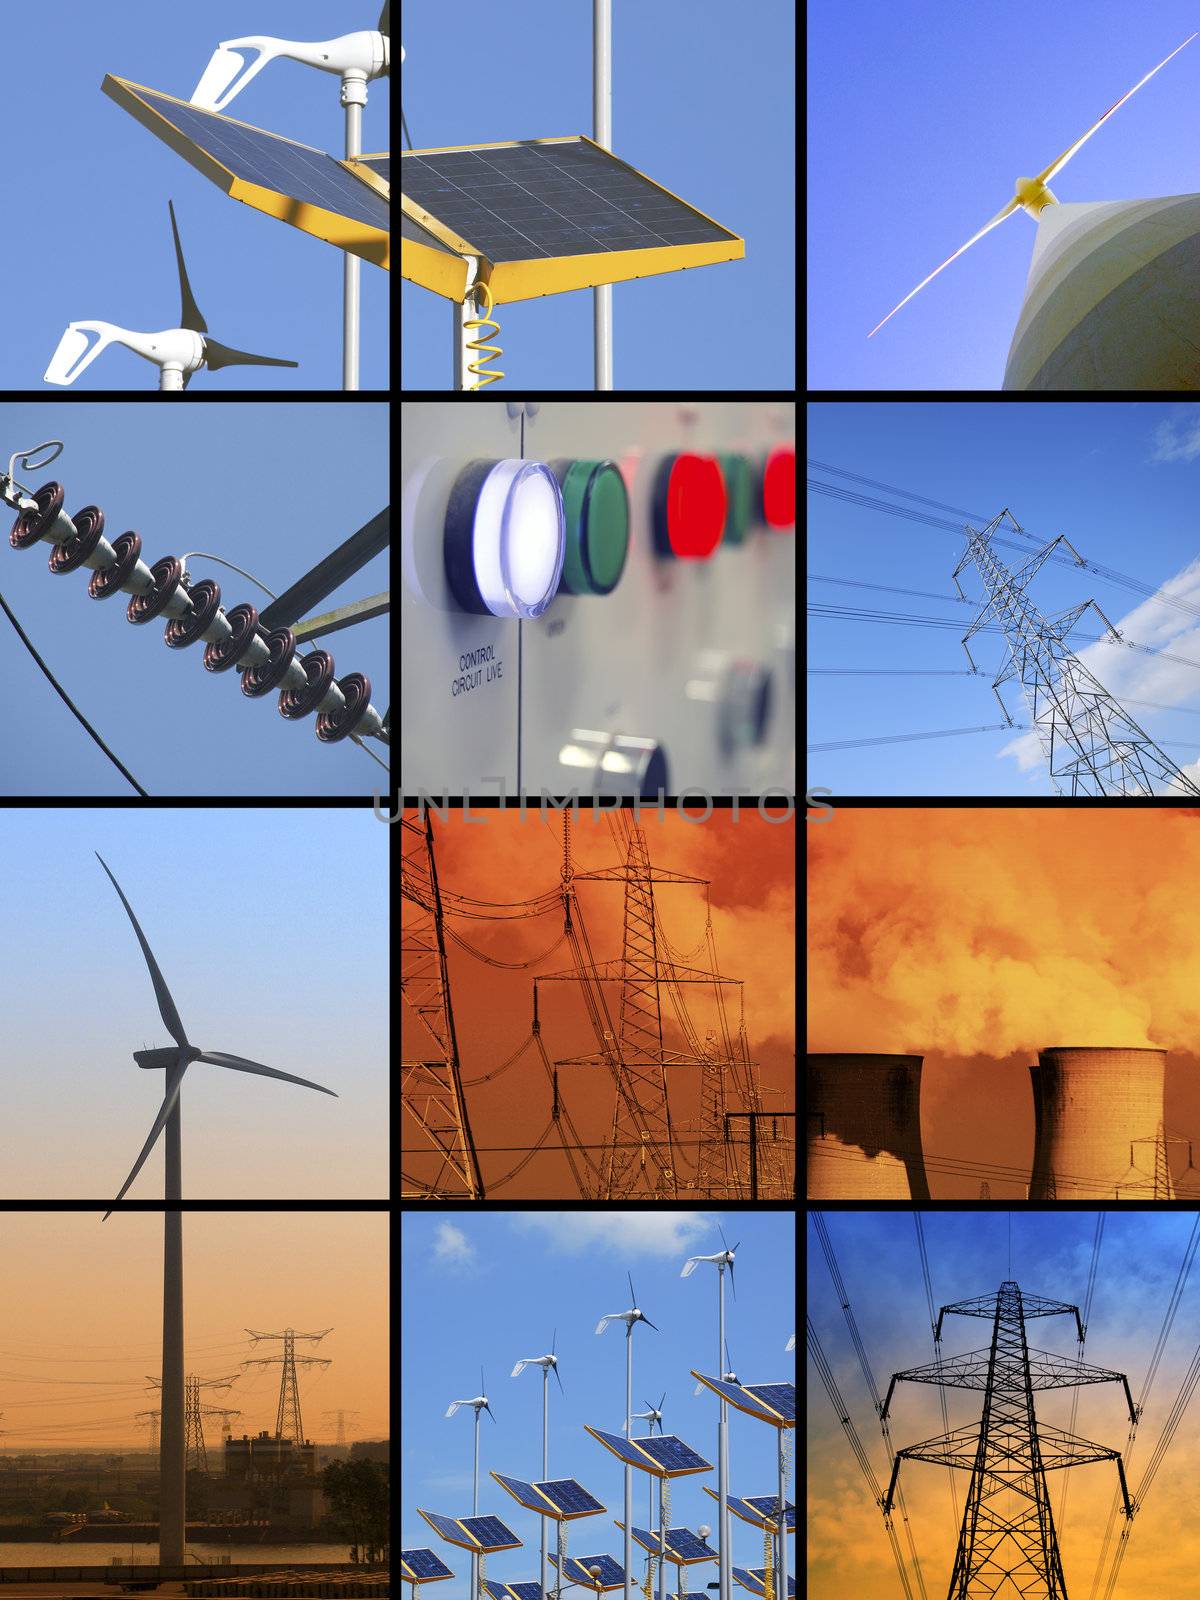 Set of twelve images relating to electricity